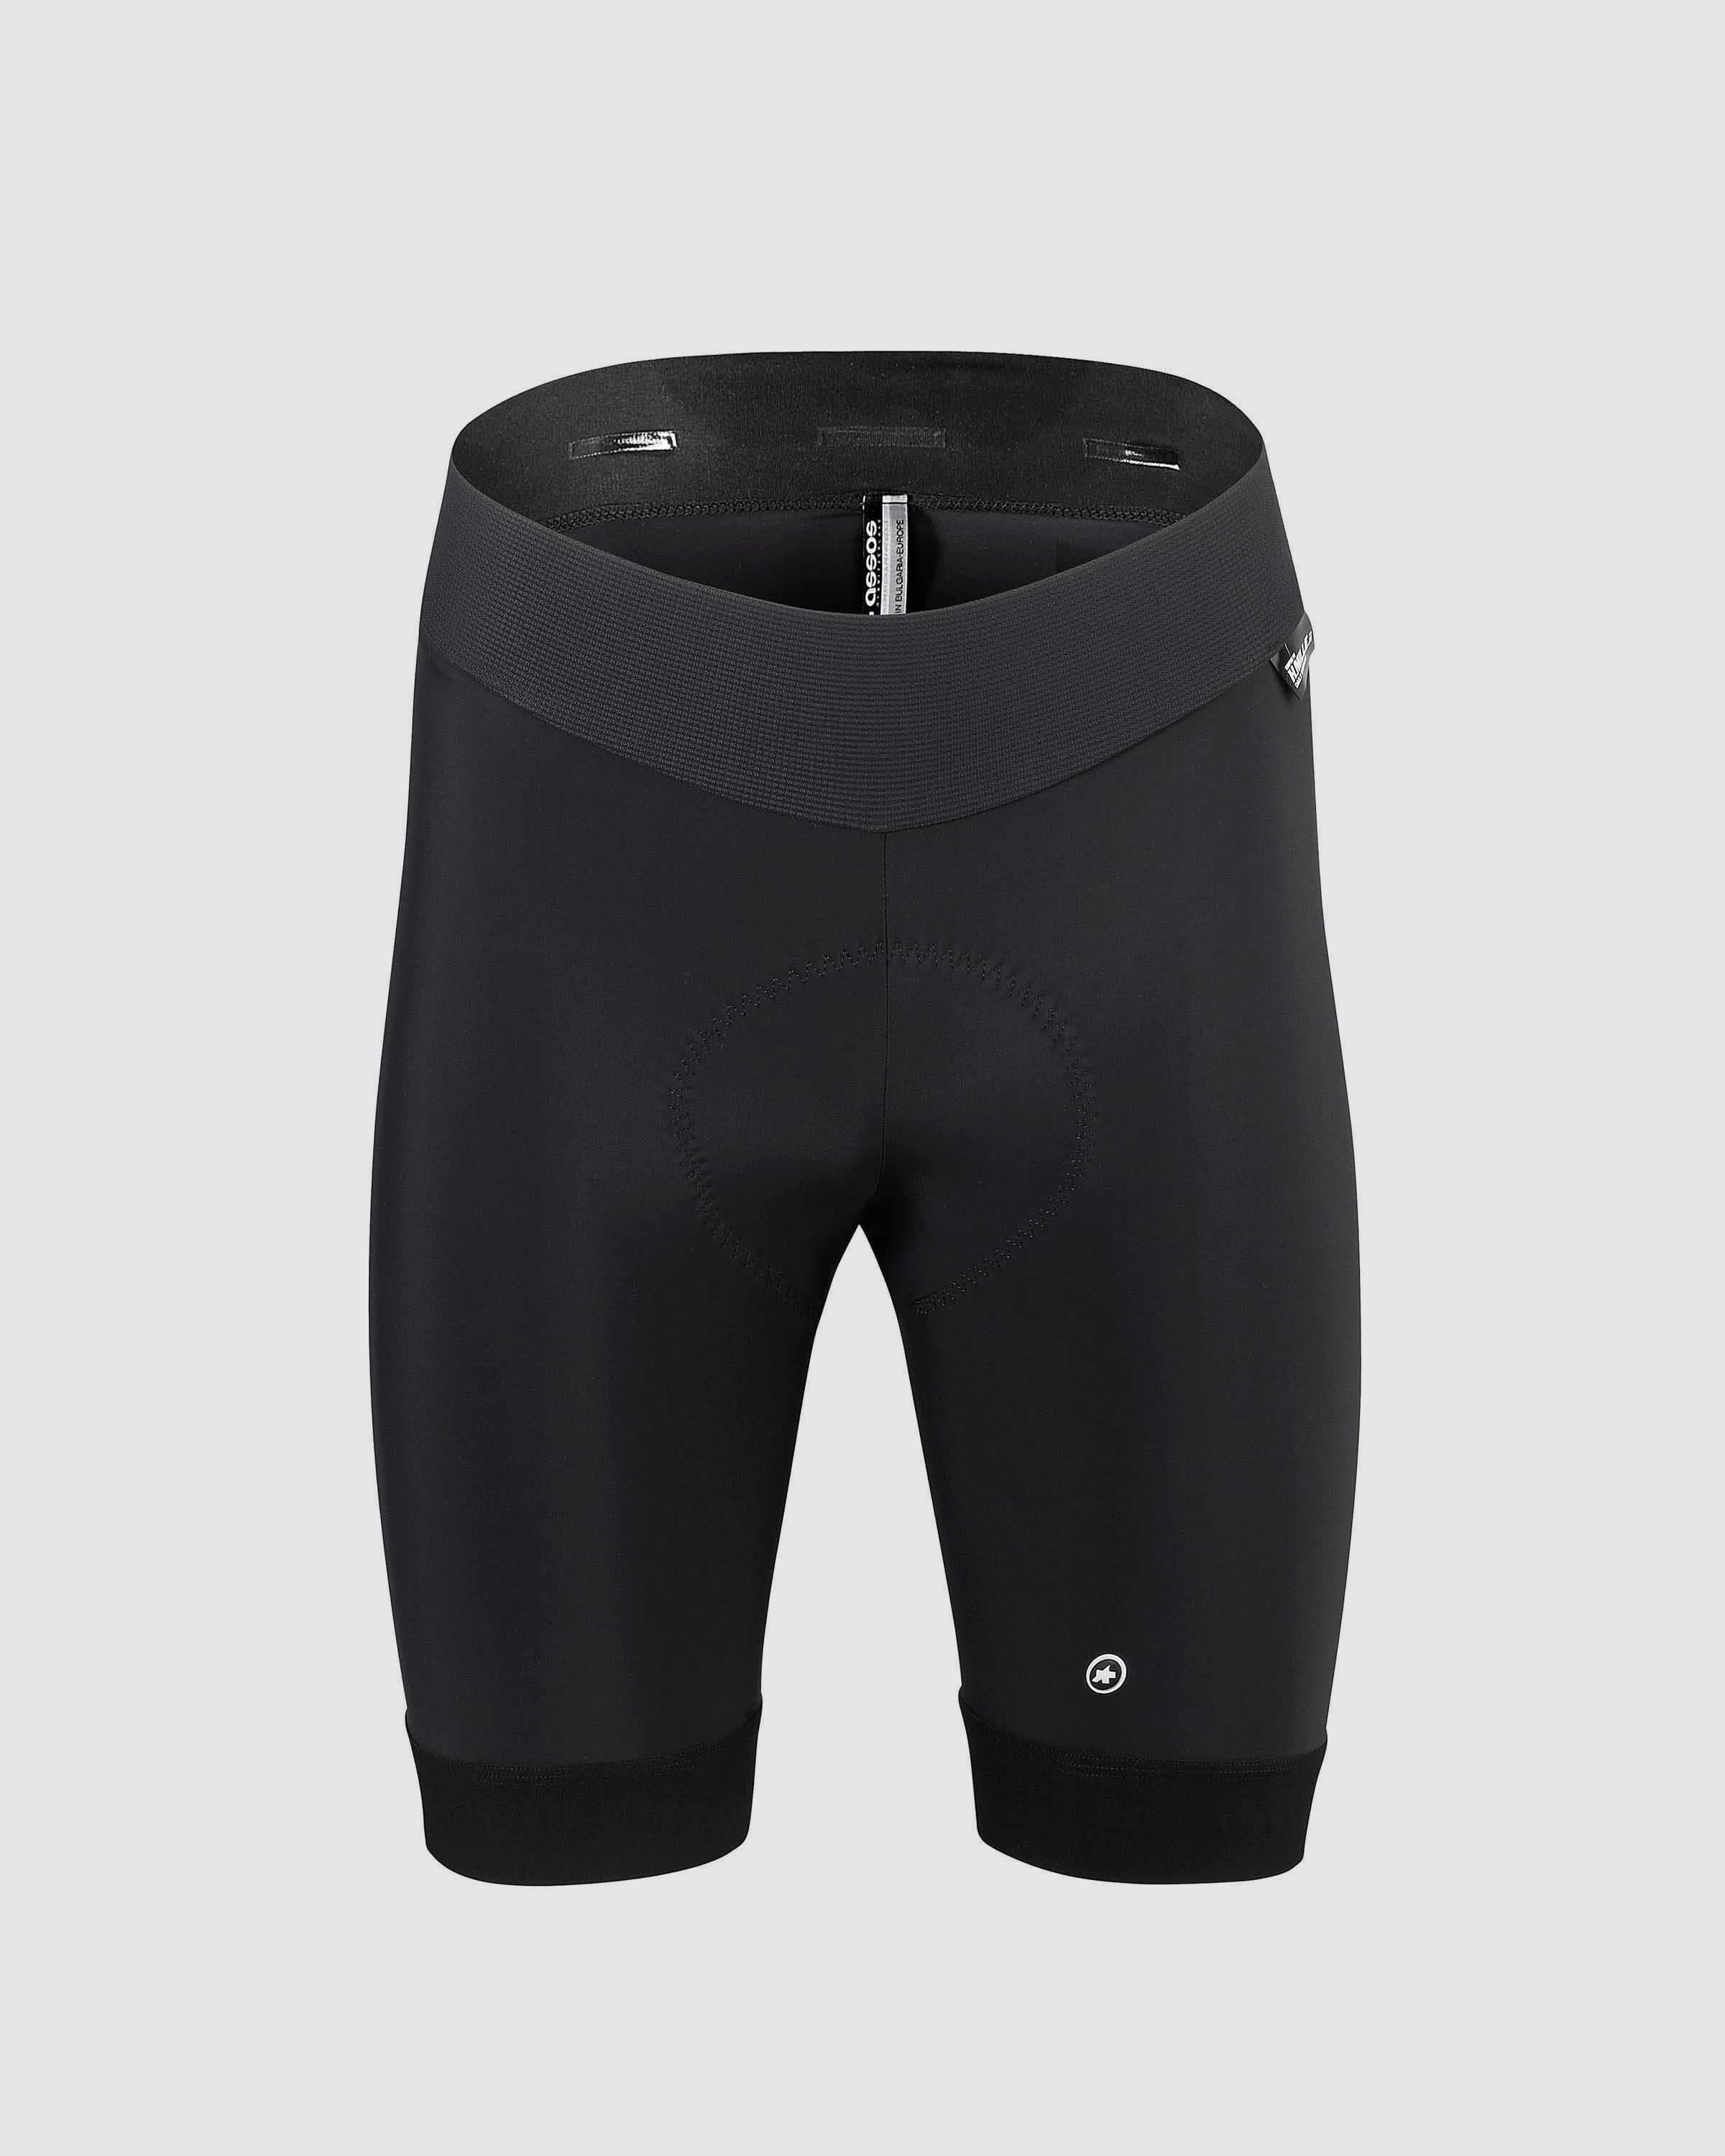 H.MilleShorts_S7 - ASSOS Of Switzerland - Official Outlet